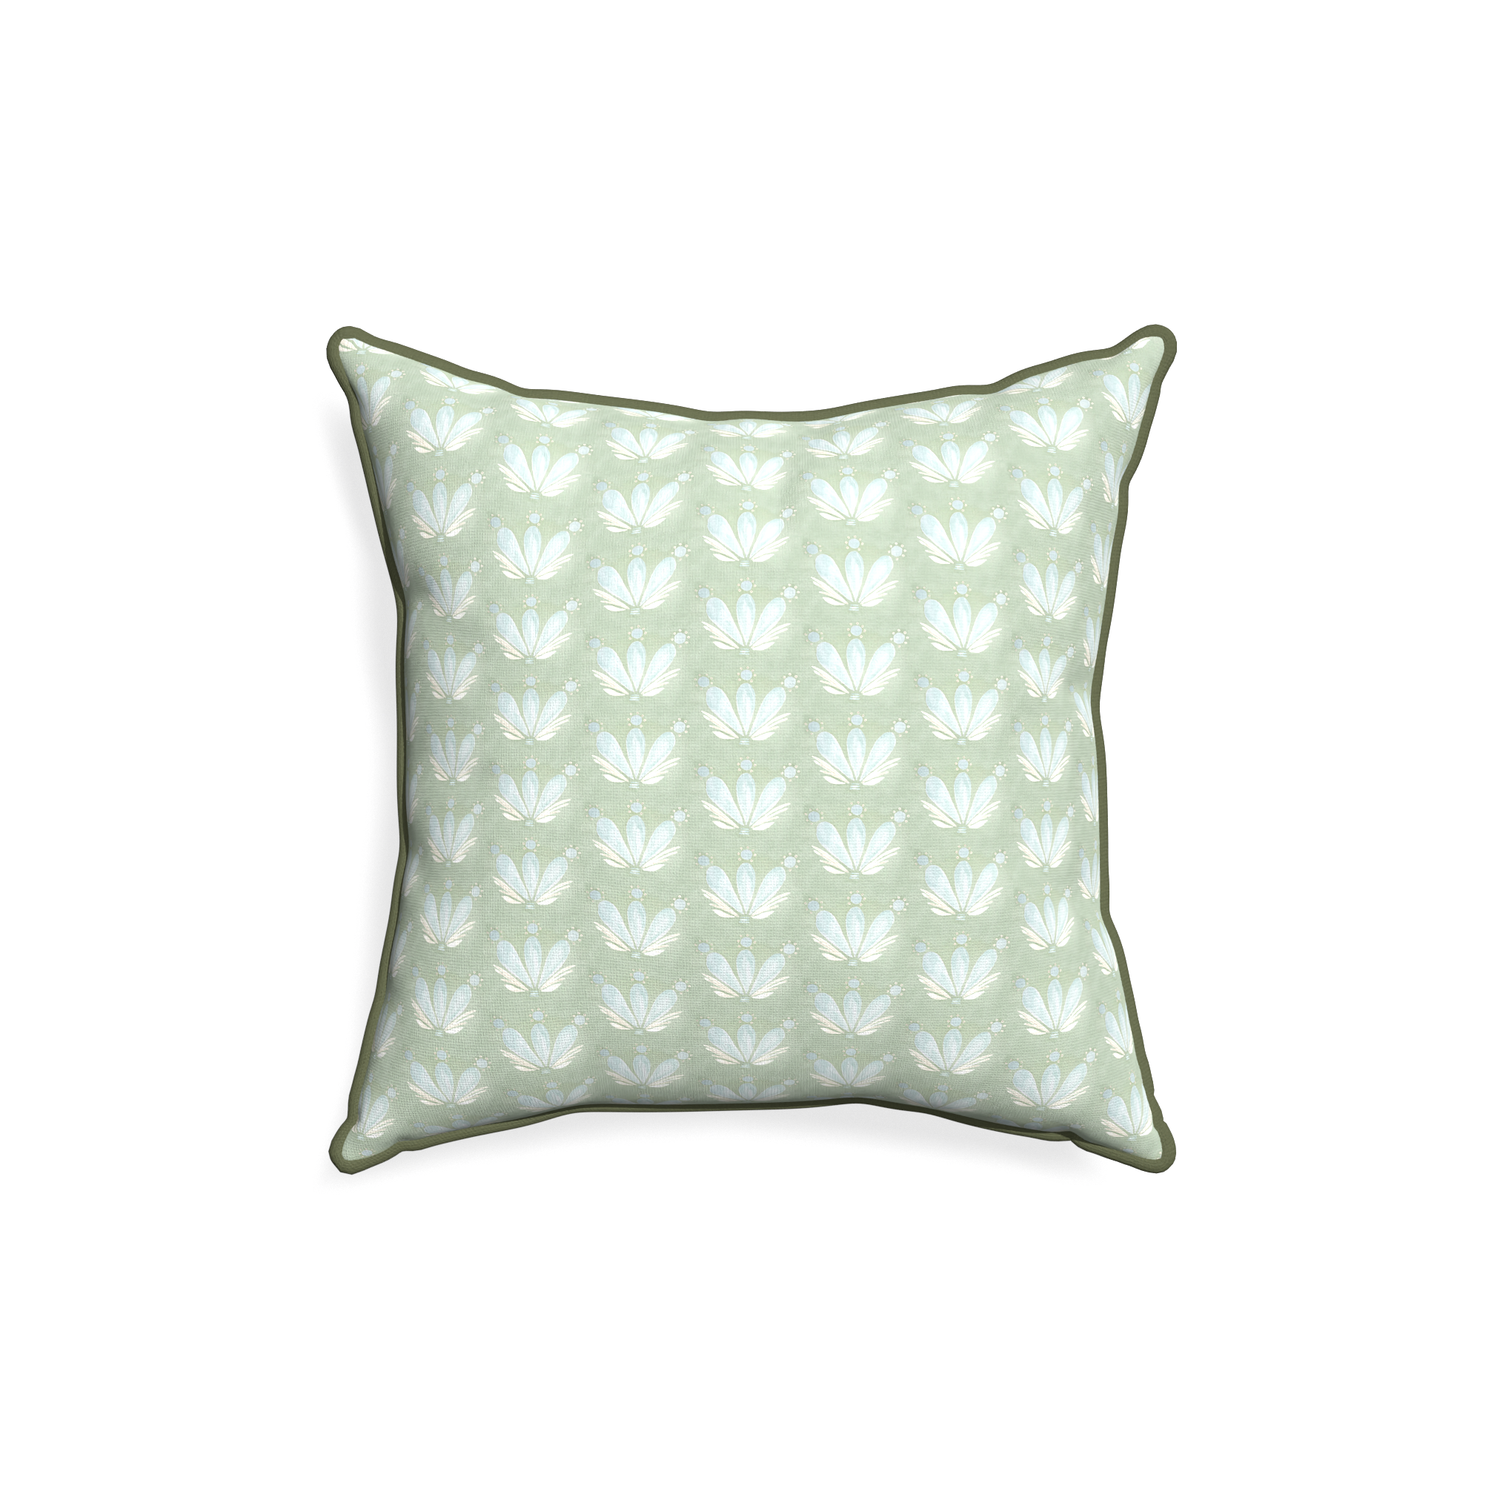 18-square serena sea salt custom blue & green floral drop repeatpillow with f piping on white background